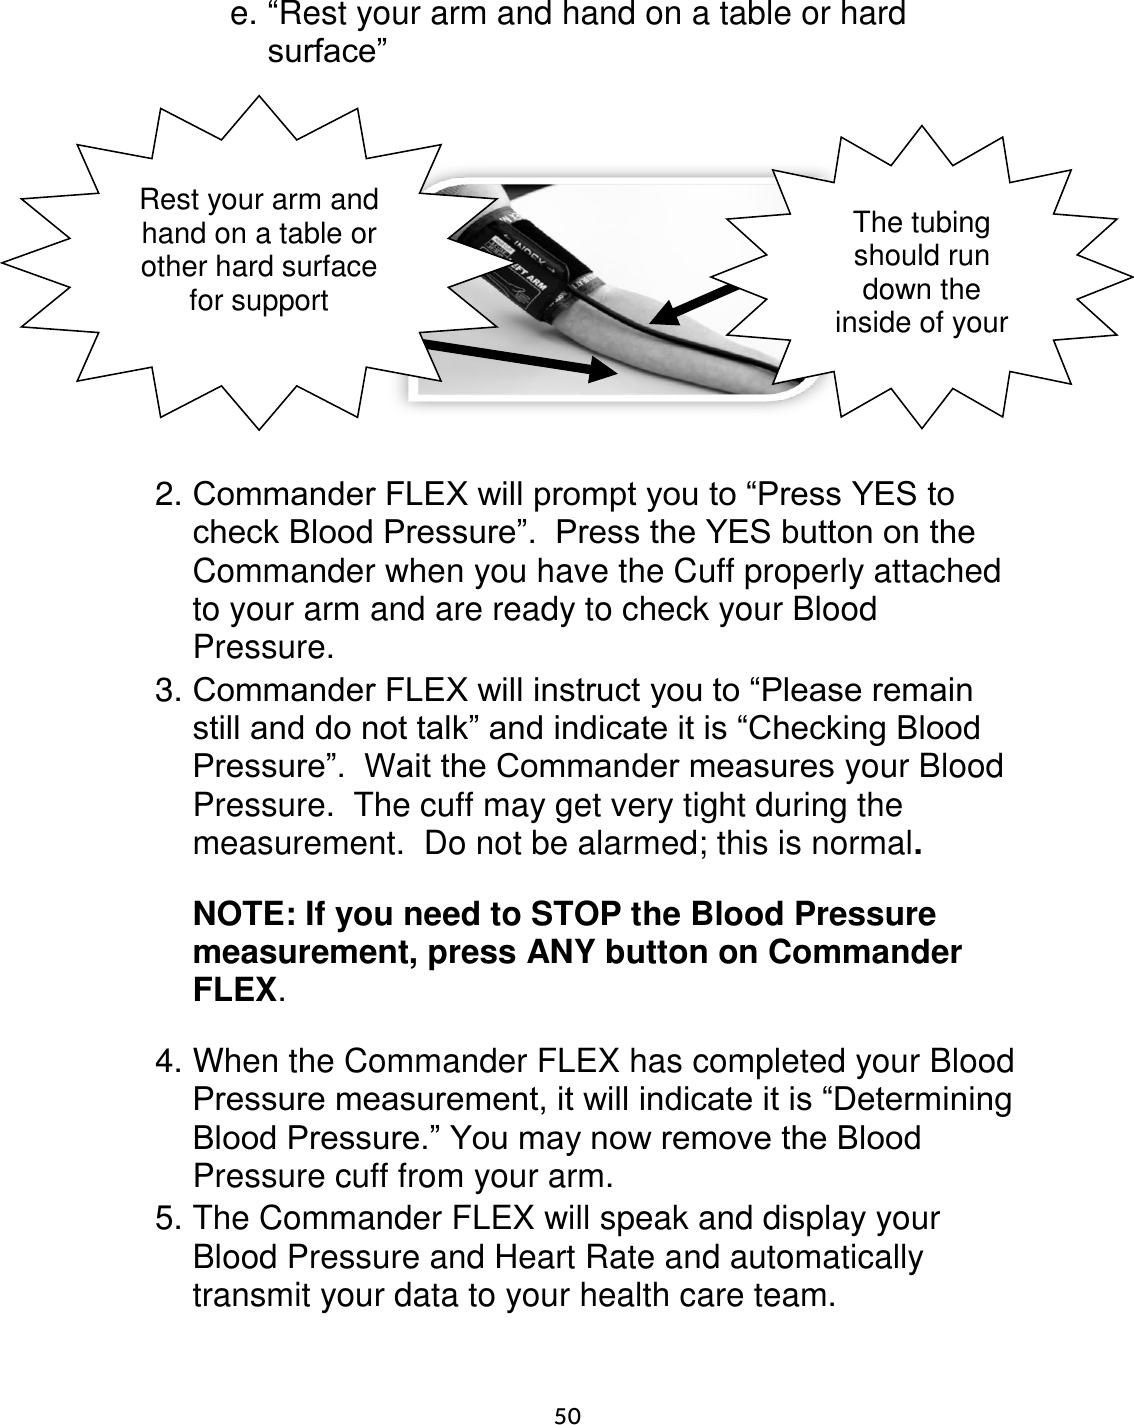                      50 e. “Rest your arm and hand on a table or hard surface”         2. Commander FLEX will prompt you to “Press YES to check Blood Pressure”.  Press the YES button on the Commander when you have the Cuff properly attached to your arm and are ready to check your Blood Pressure. 3. Commander FLEX will instruct you to “Please remain still and do not talk” and indicate it is “Checking Blood Pressure”.  Wait the Commander measures your Blood Pressure.  The cuff may get very tight during the measurement.  Do not be alarmed; this is normal.    NOTE: If you need to STOP the Blood Pressure measurement, press ANY button on Commander FLEX.  4. When the Commander FLEX has completed your Blood Pressure measurement, it will indicate it is “Determining Blood Pressure.” You may now remove the Blood Pressure cuff from your arm. 5. The Commander FLEX will speak and display your Blood Pressure and Heart Rate and automatically transmit your data to your health care team. Rest your arm and hand on a table or other hard surface for support The tubing should run down the inside of your arm 